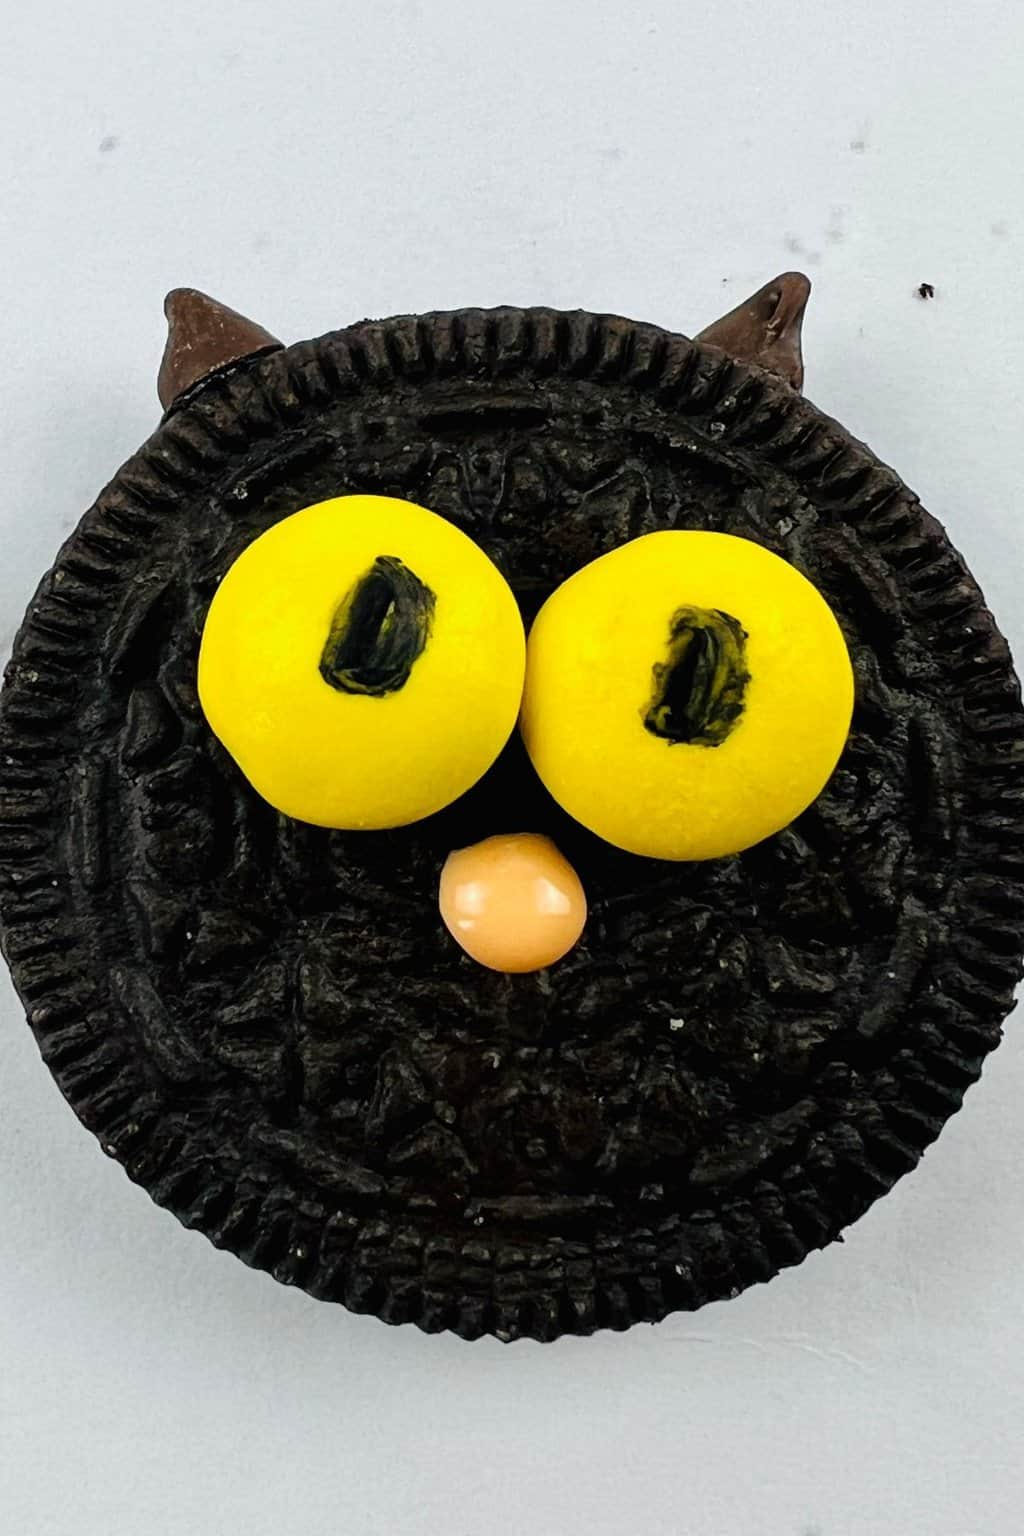 Oreo cat cookie for Halloween with yellow eyes.